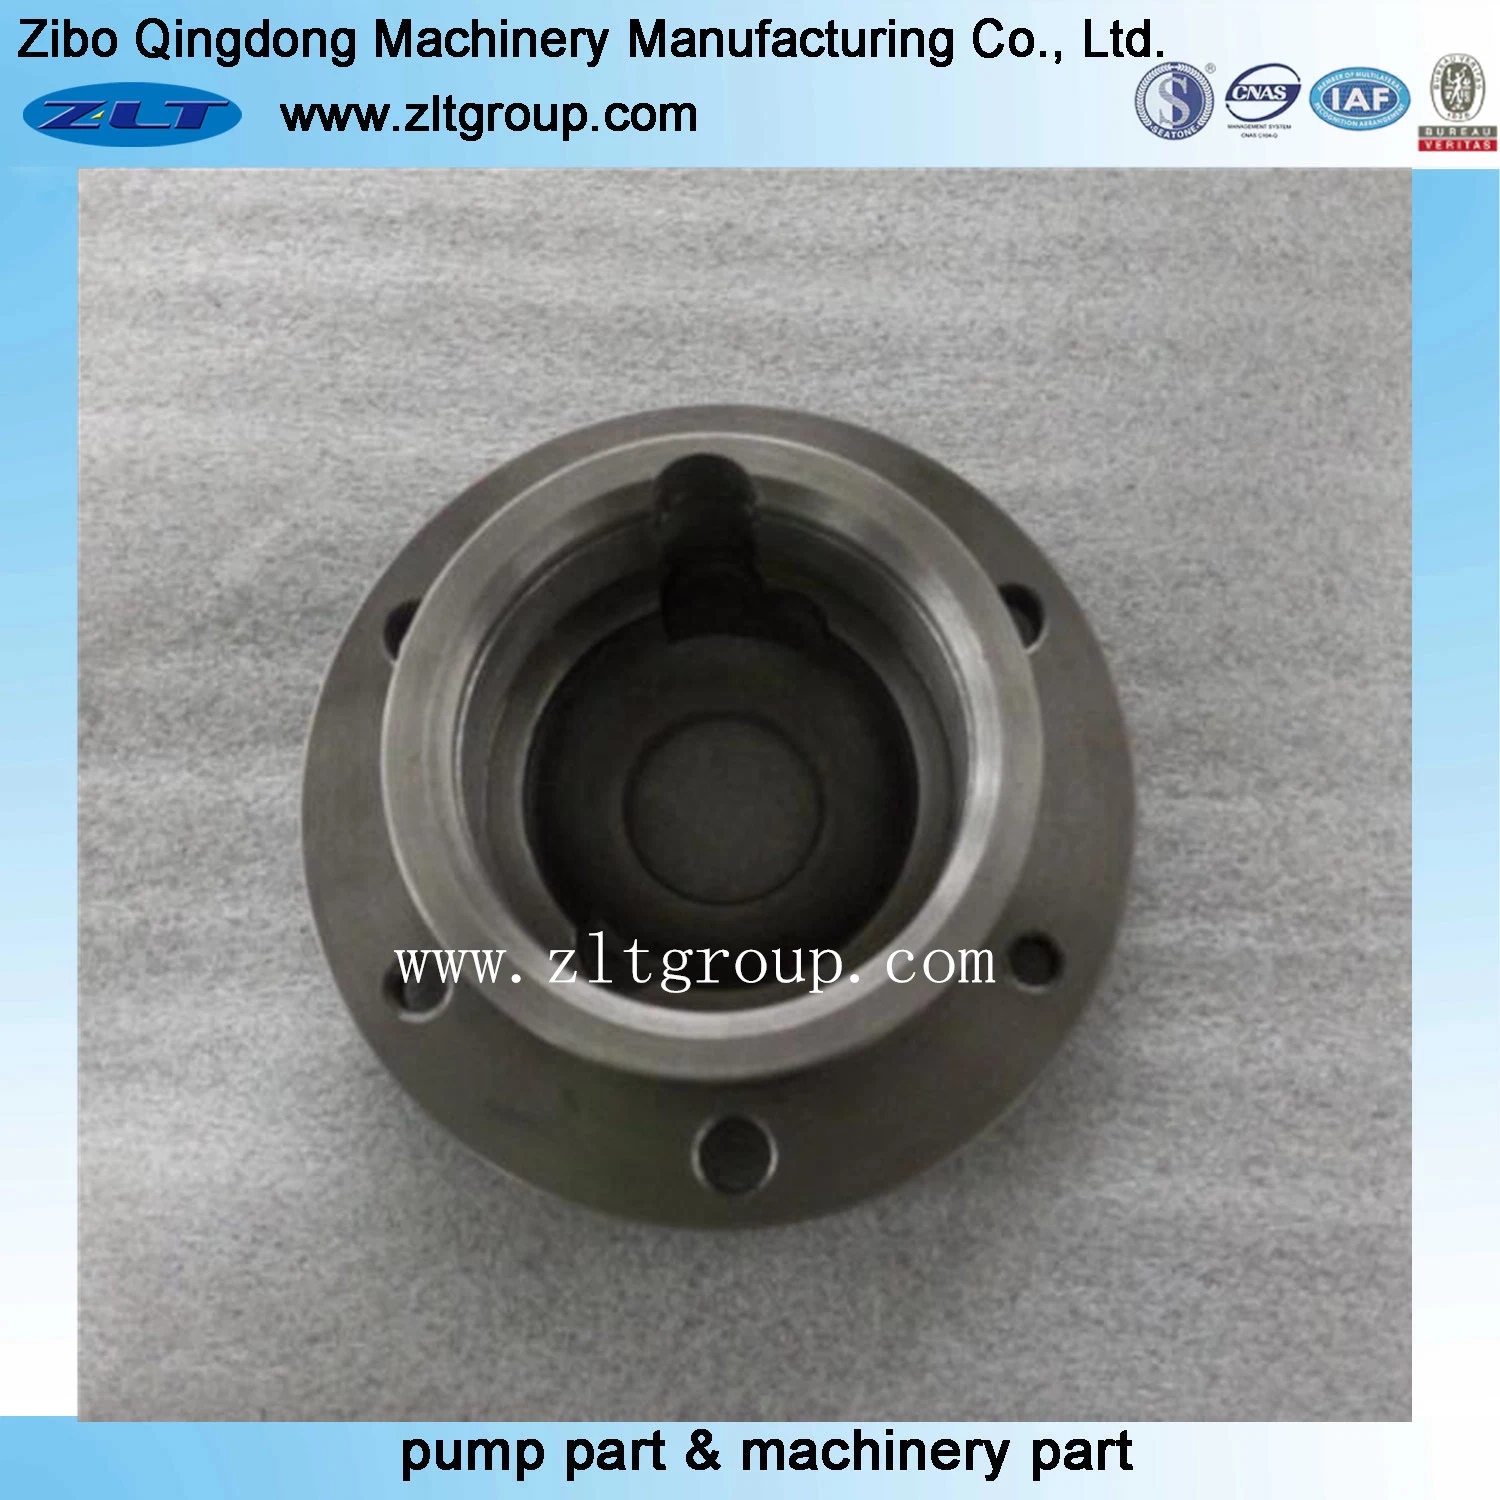 ANSI Replace Goulds Ductile Iron Pump Bearing Carrier